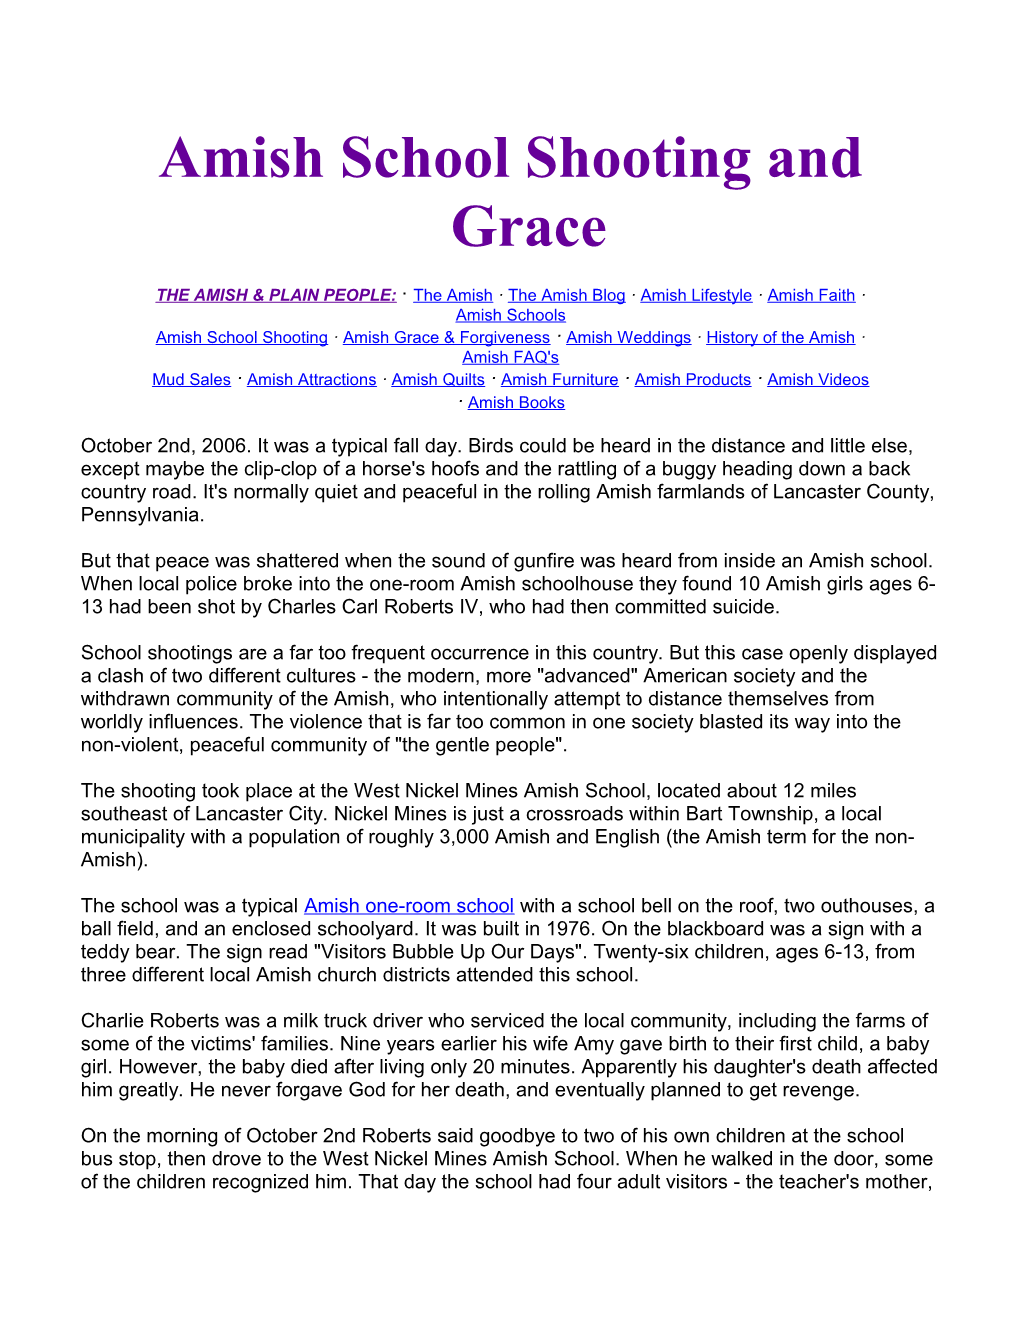 Amish School Shooting and Grace